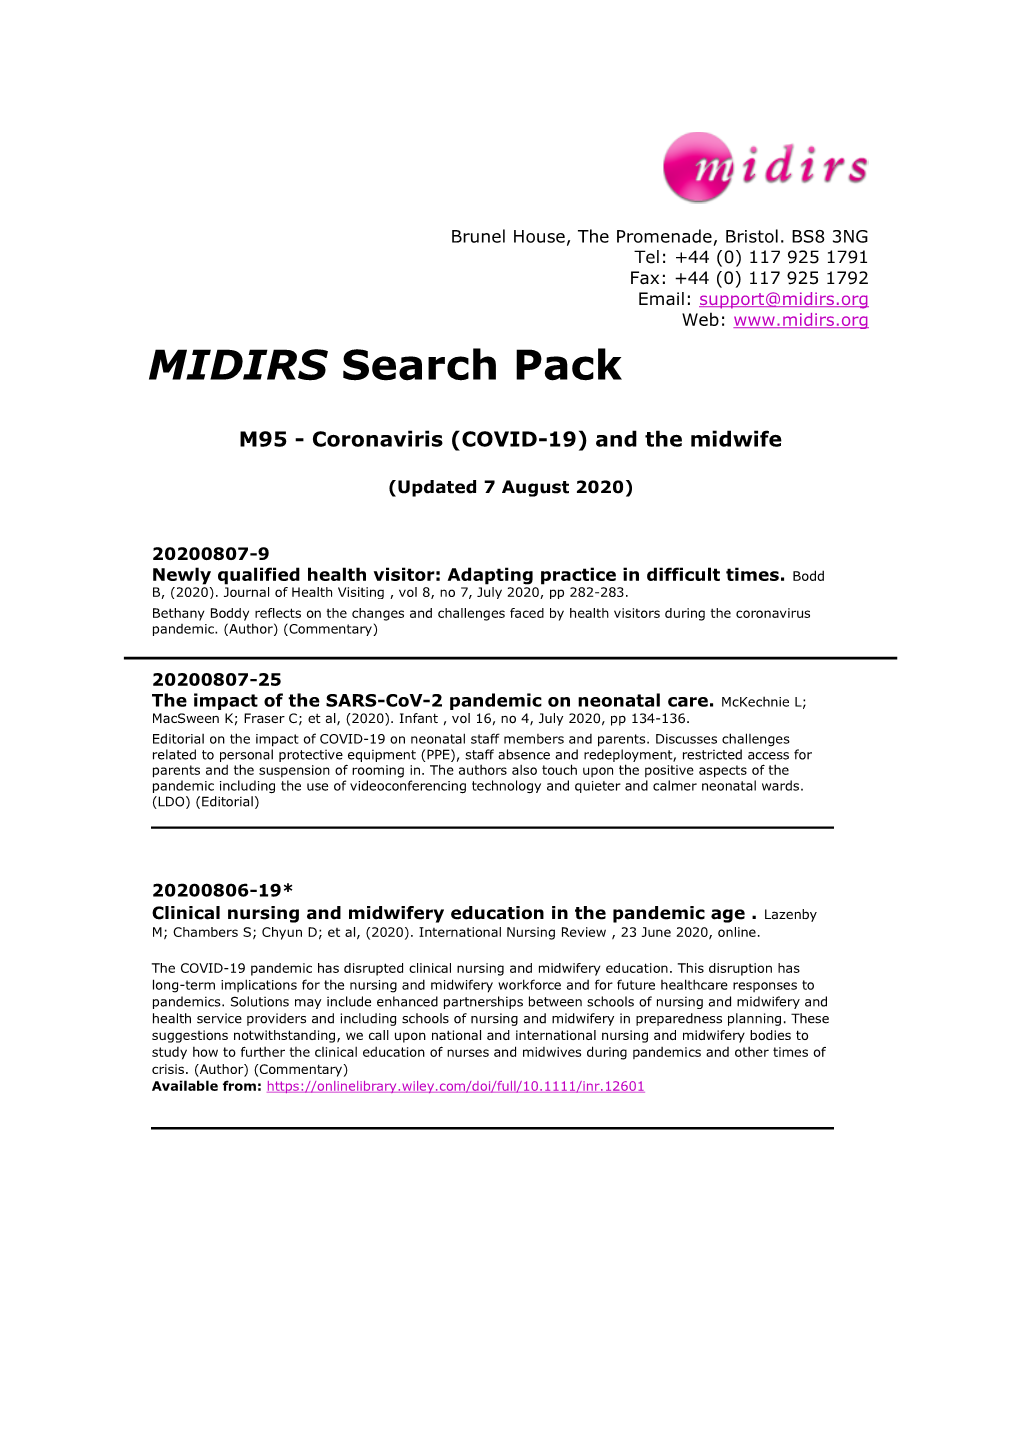 MIDIRS Search Pack